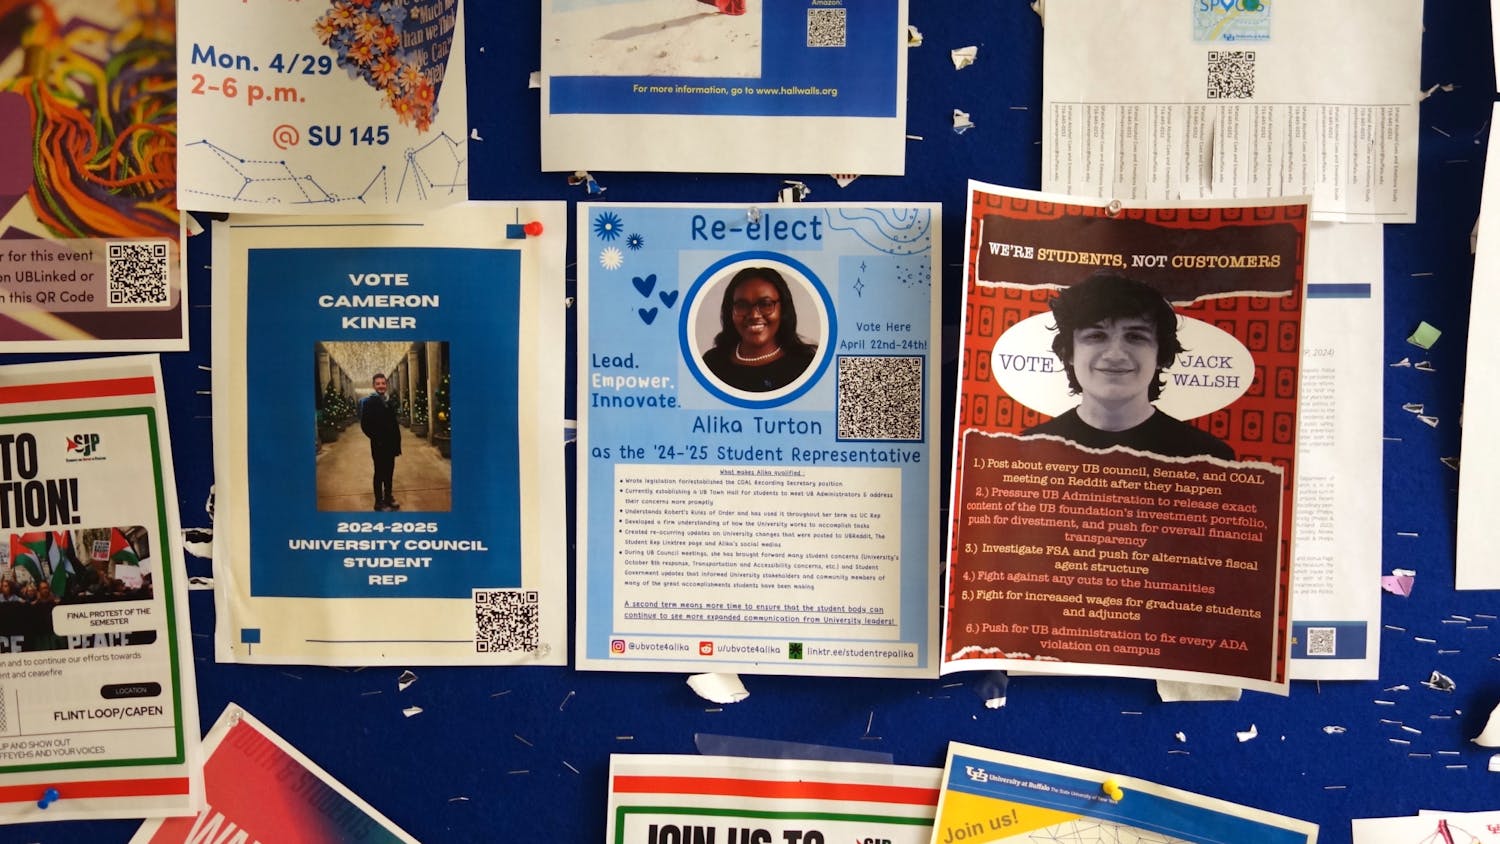 Flyers posted in the Student Union promote the three candidates for UB Council Student Representative.